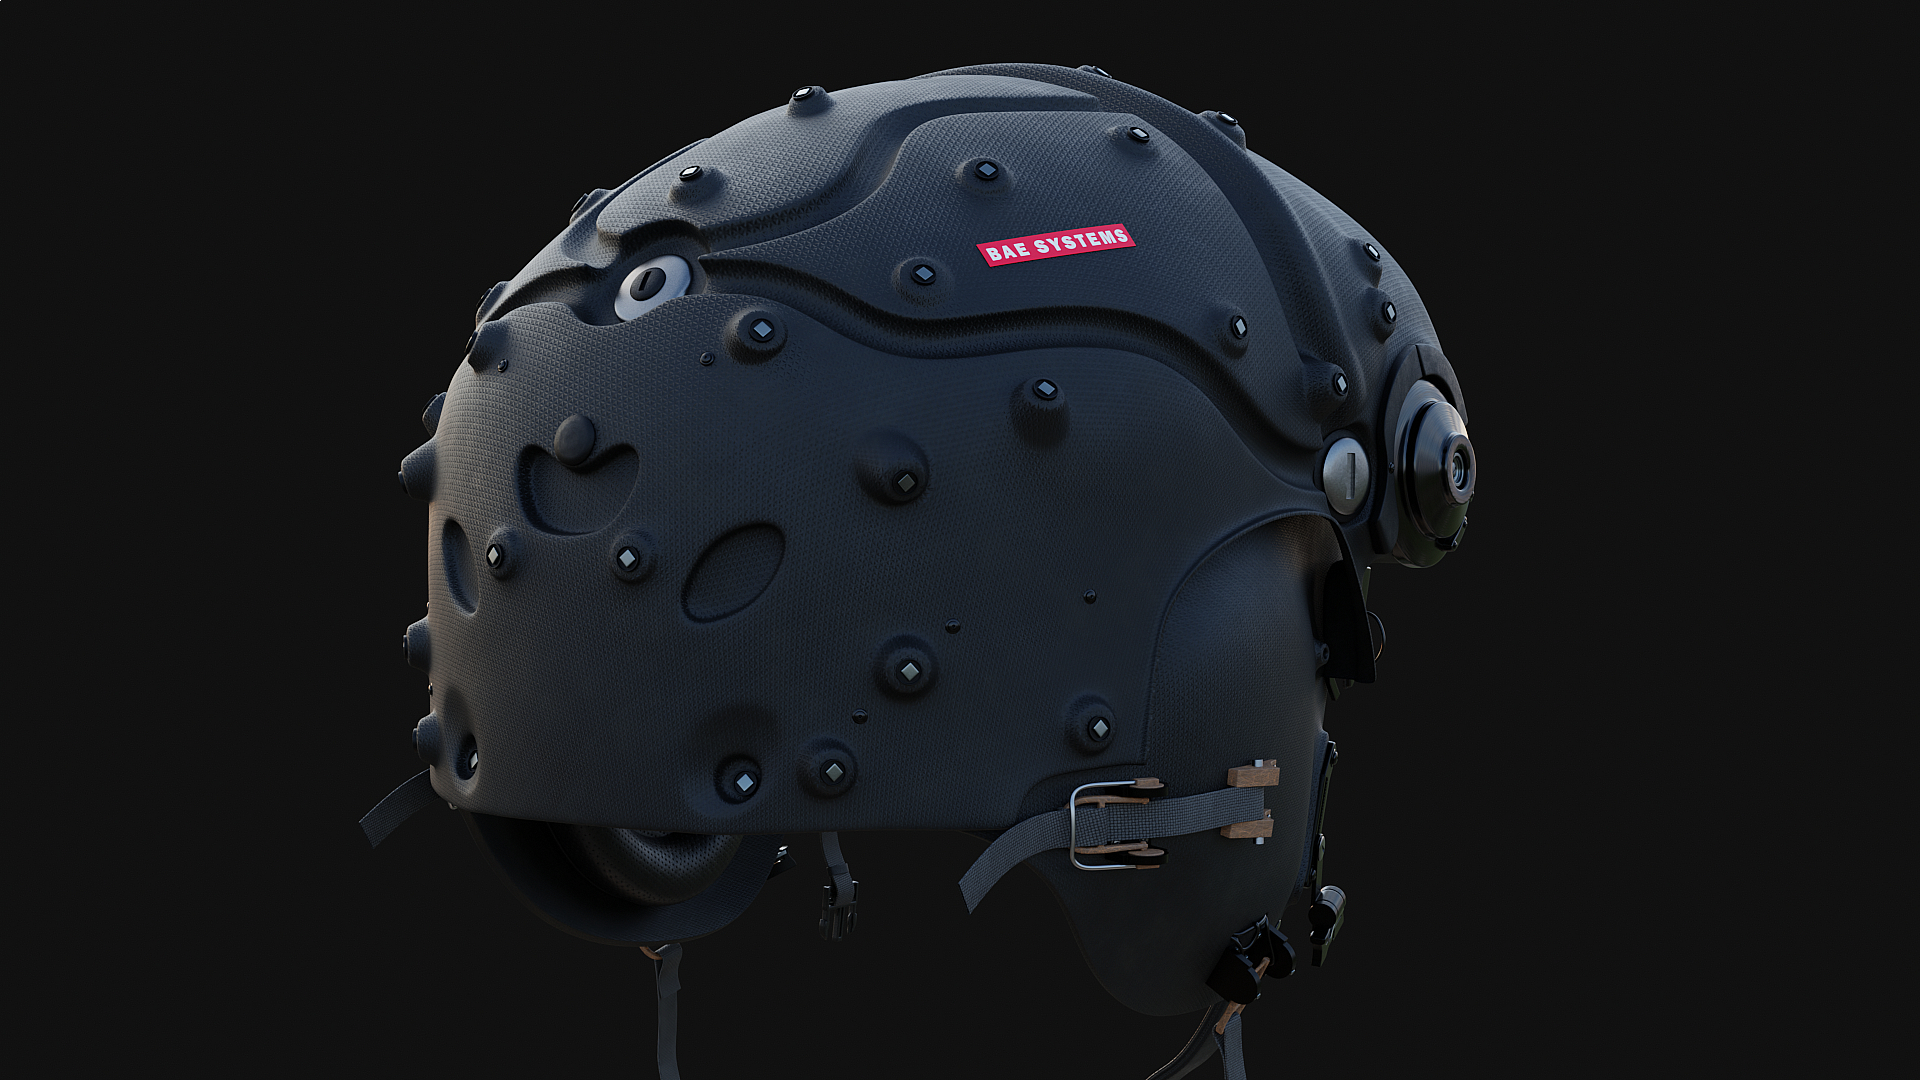 Attaccante II HMD in Blender cycles render immagine